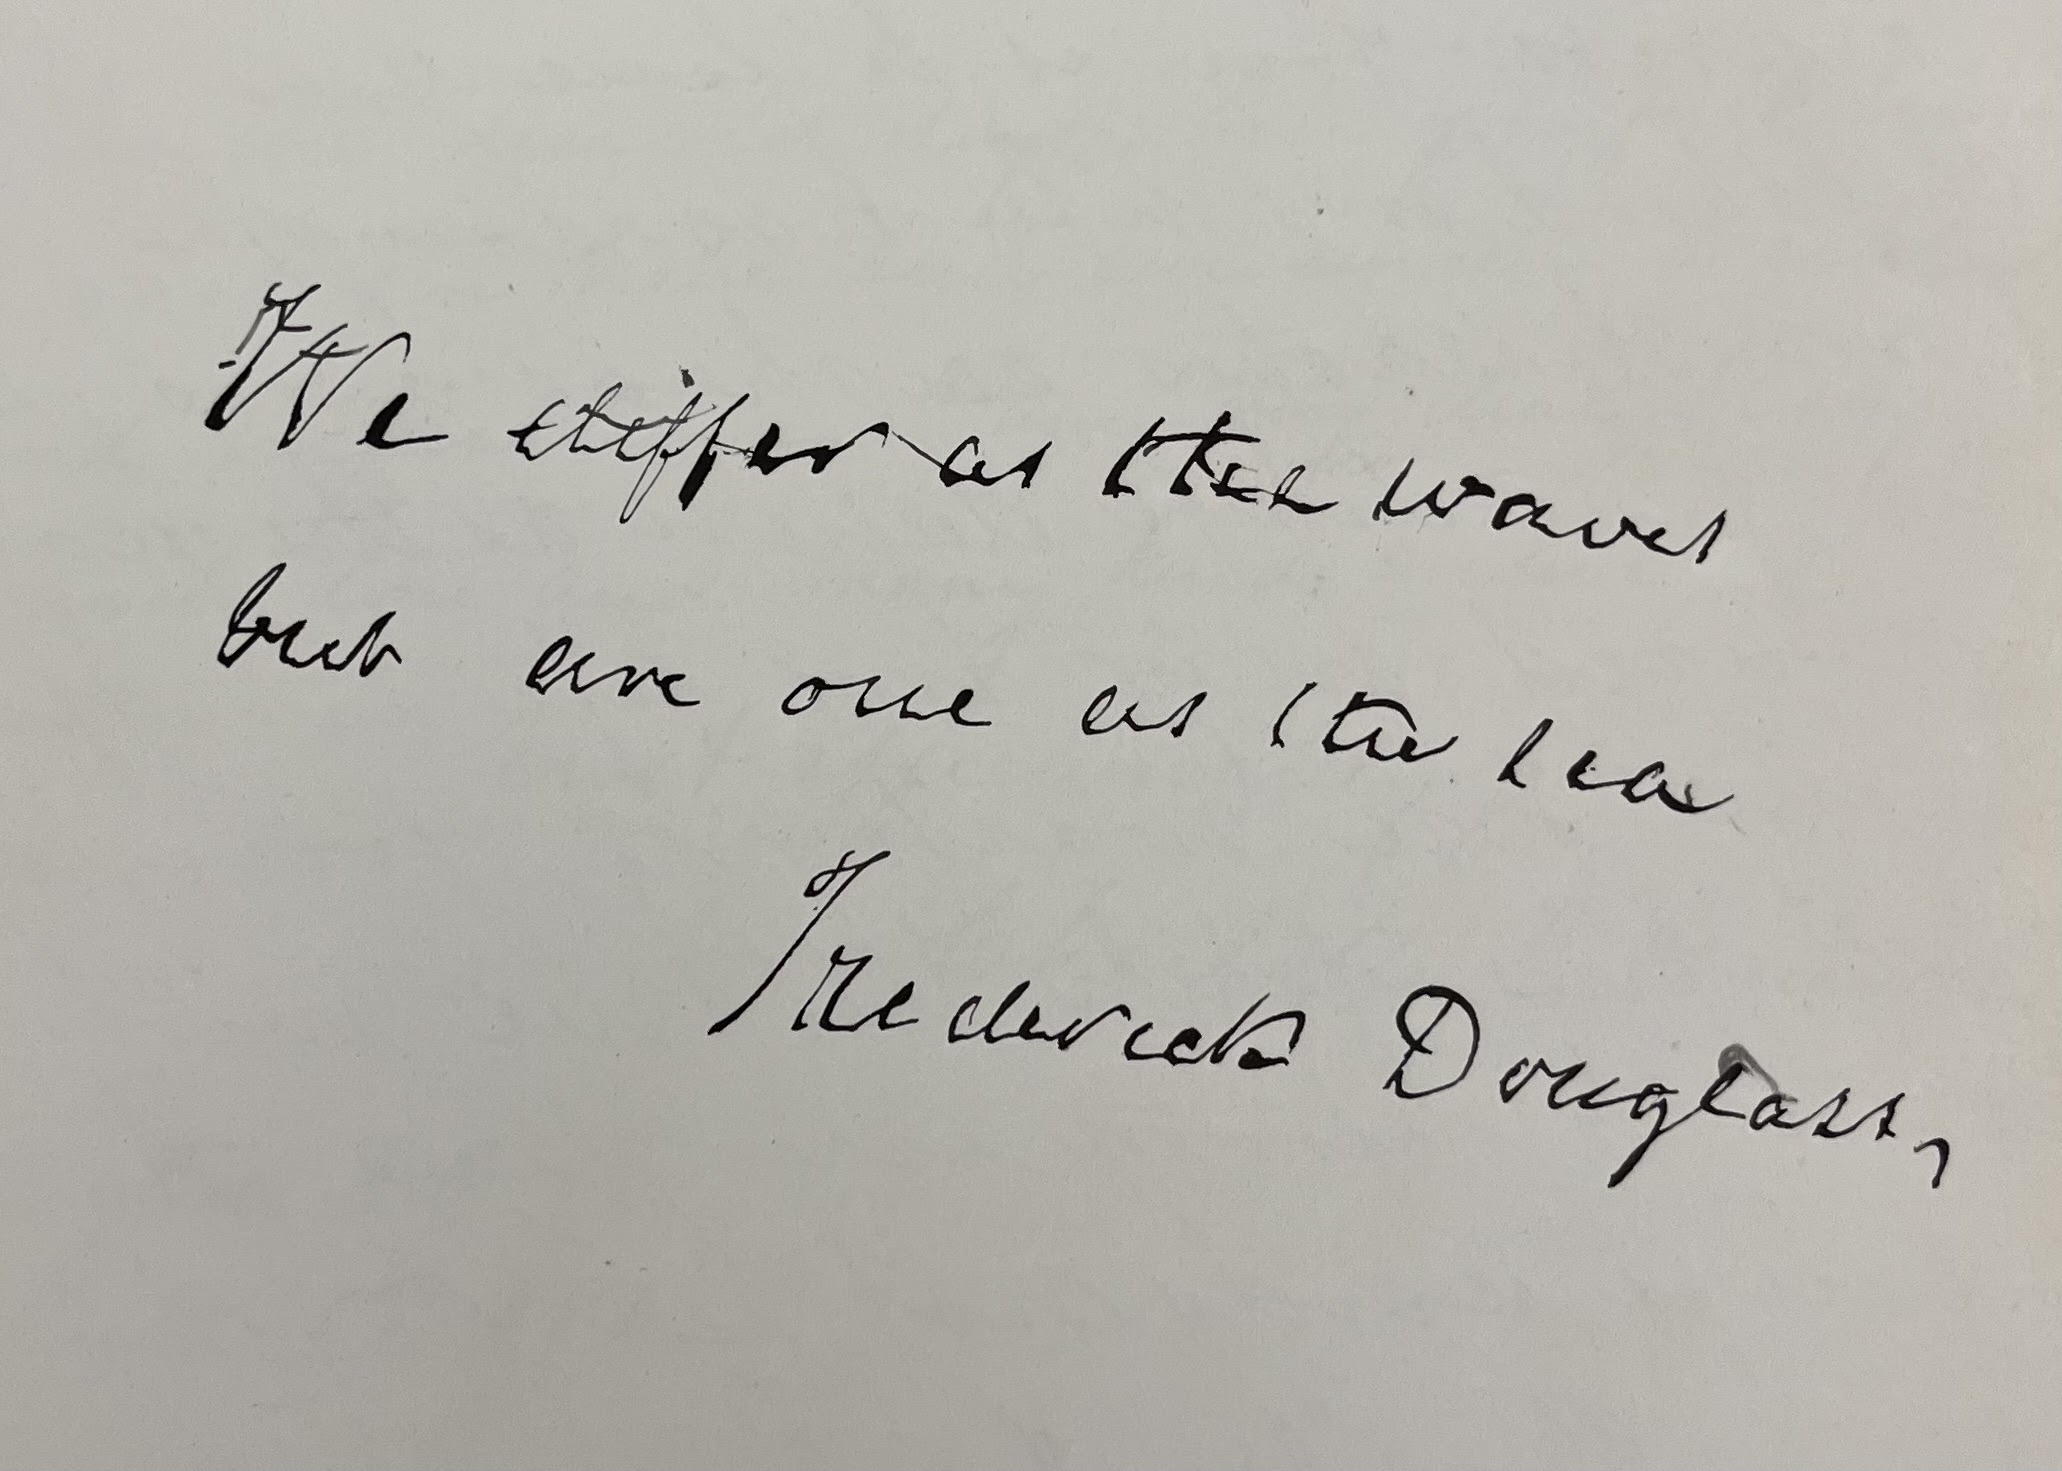 An autograph book in the College Archives contains this unauthenticated inscription: "We differ as the waves but are one as the sea."